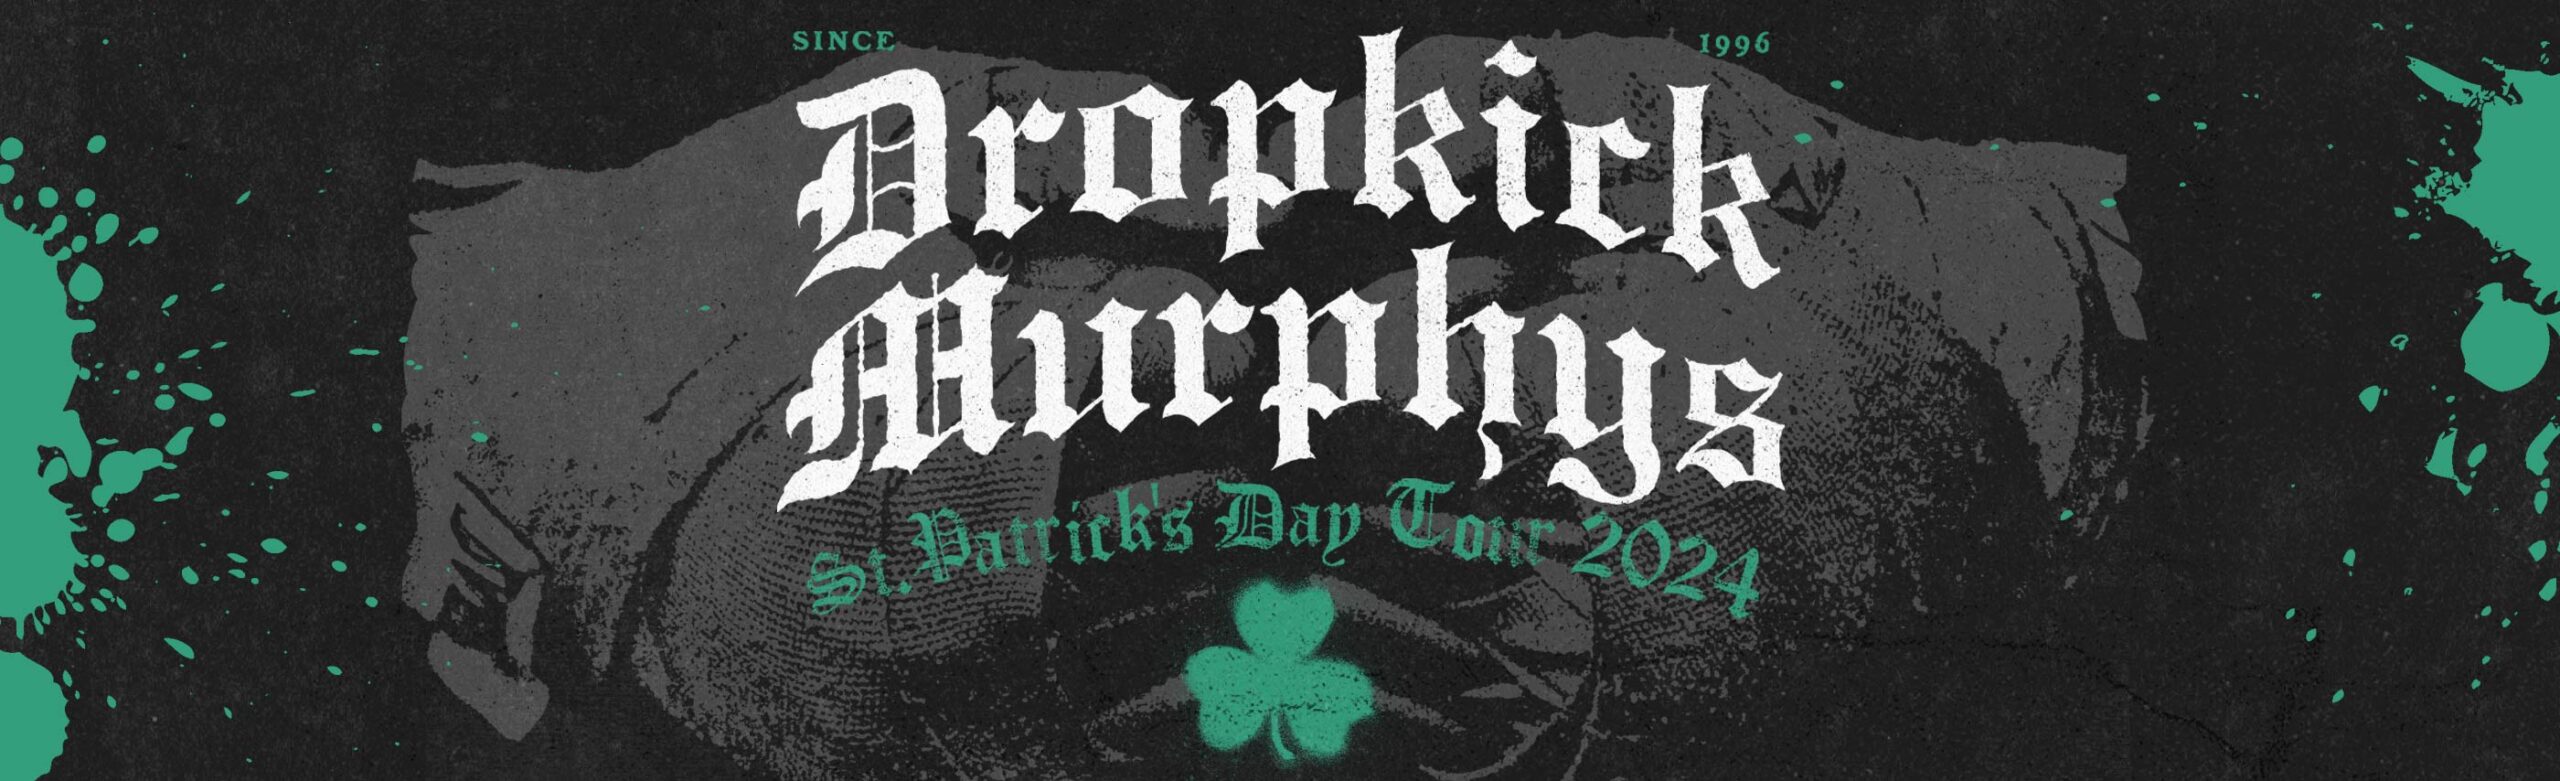 Dropkick Murphys Announce Concert at The ELM with Pennywise and The Scratch Image